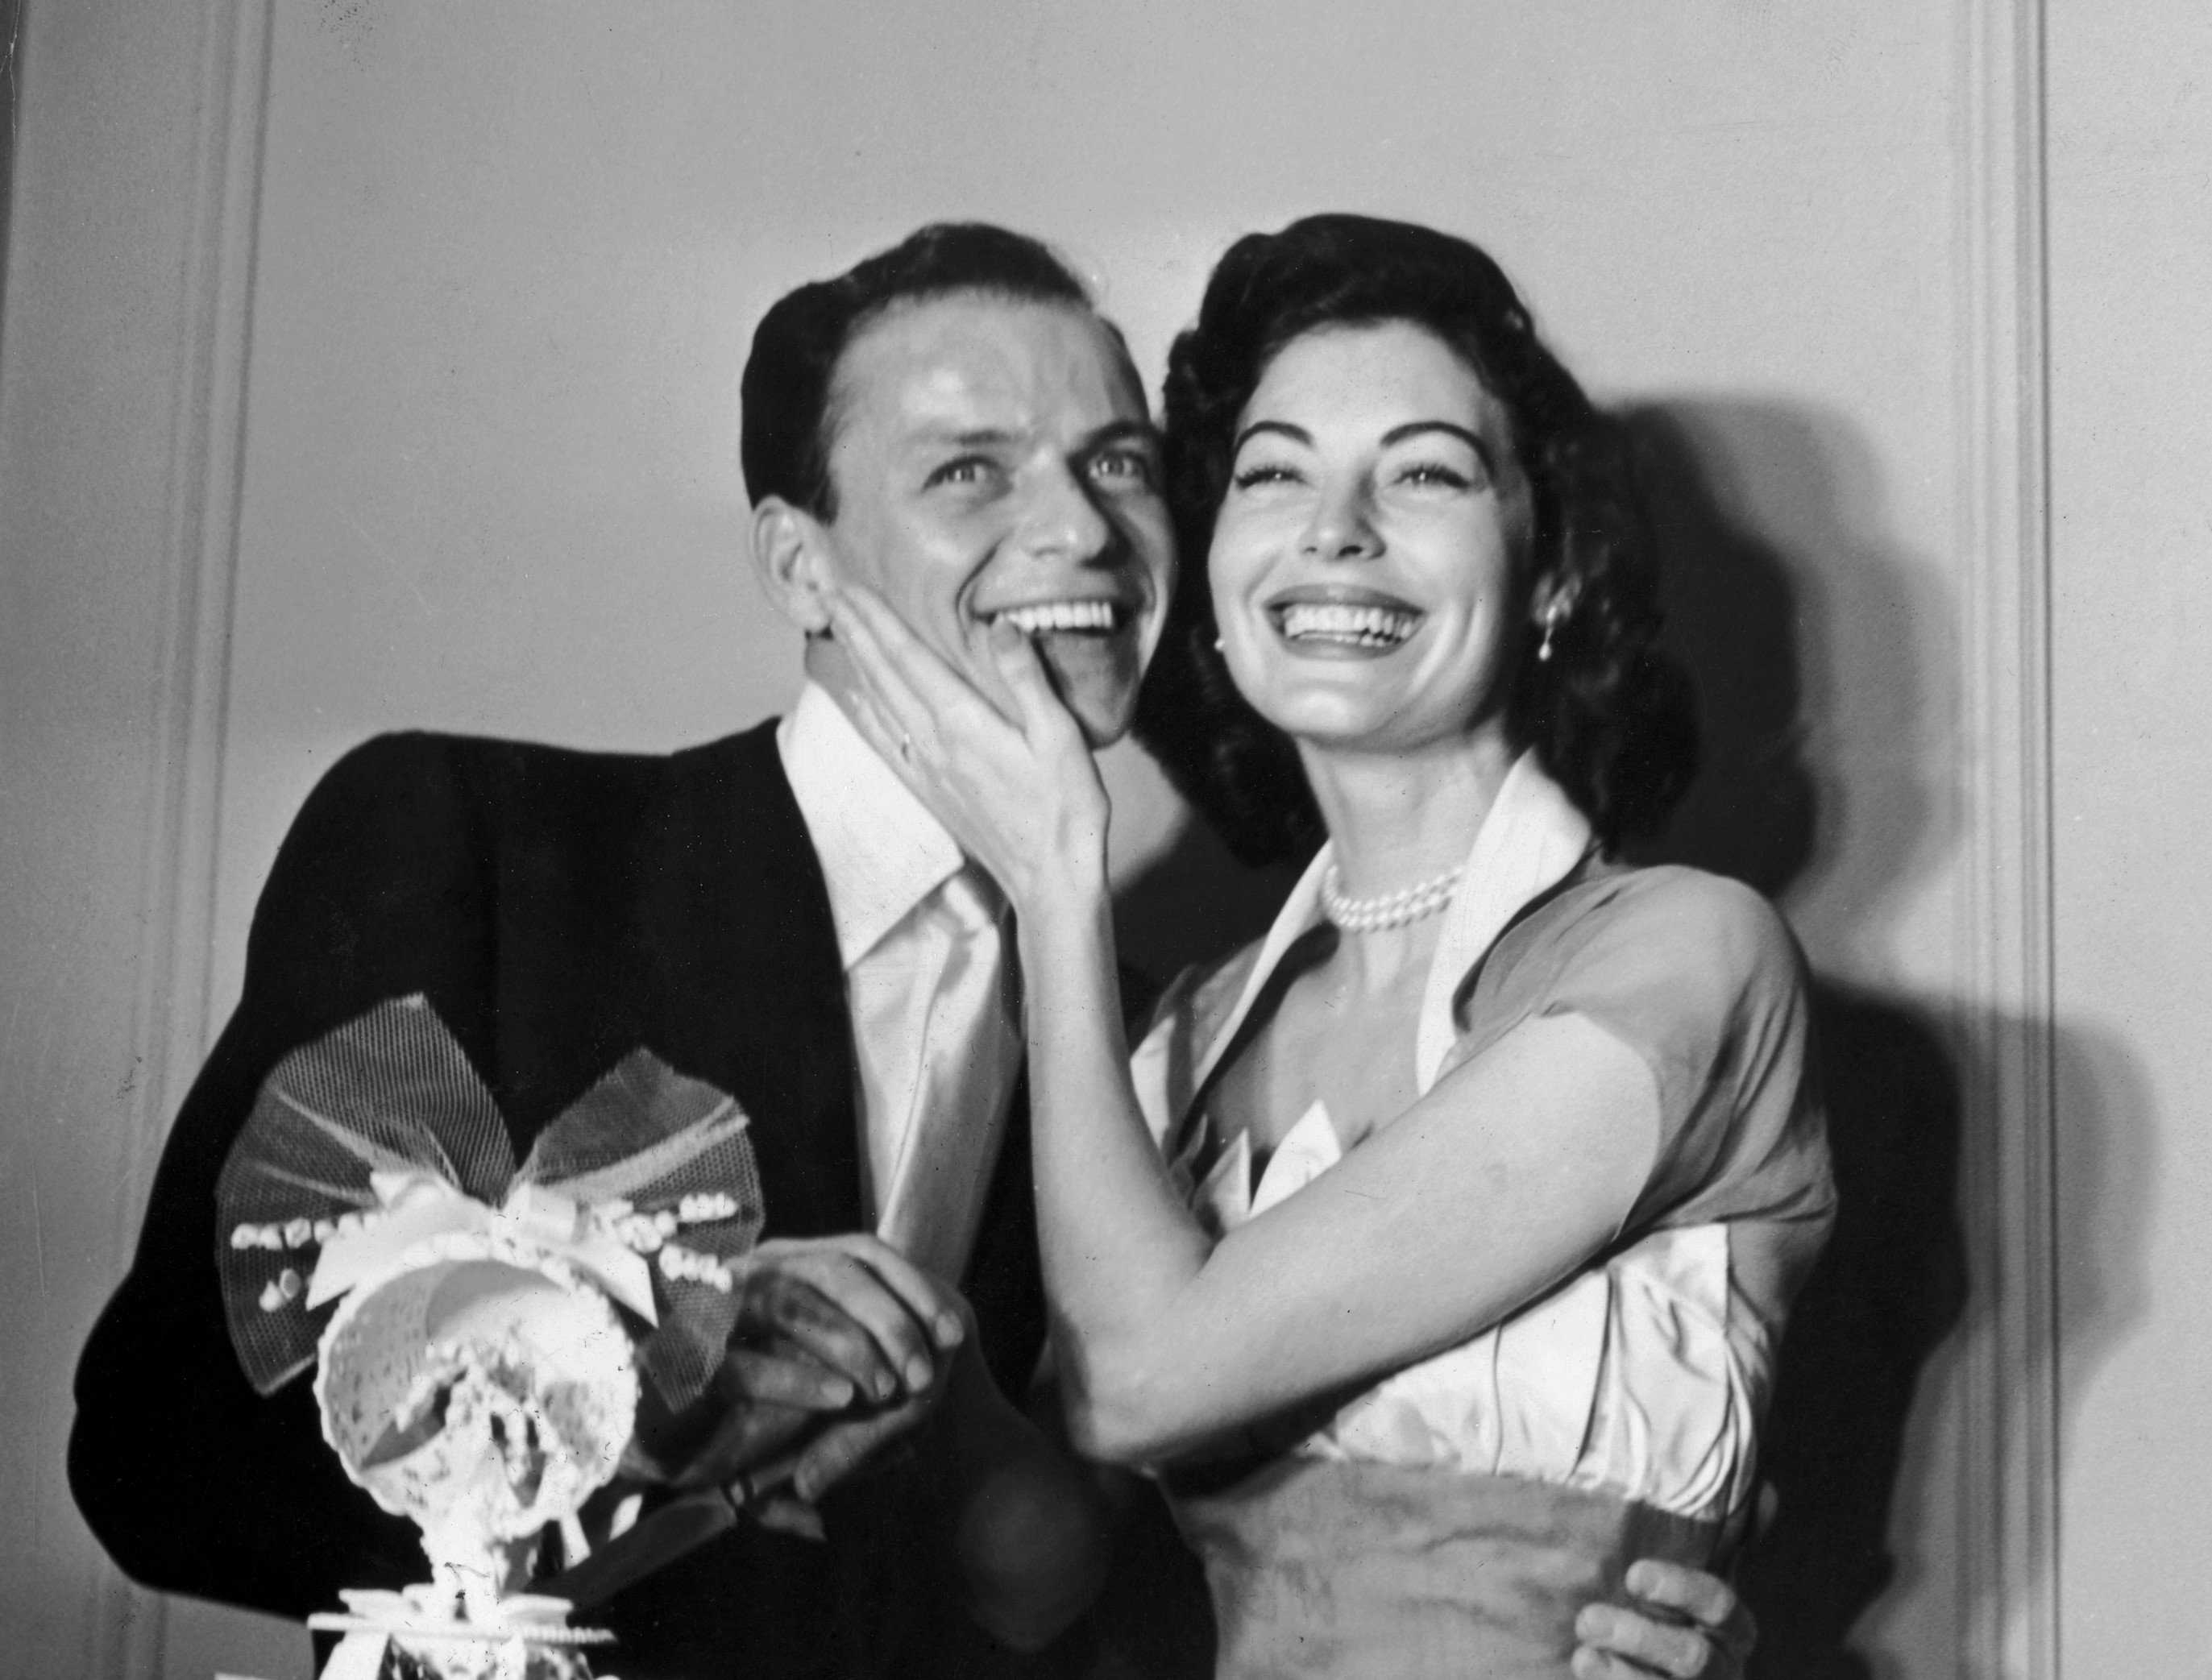 A black and white photo of Frank Sinatra and Ava Gardner on their wedding day. Gardner holds her hand to Sinatra's face.